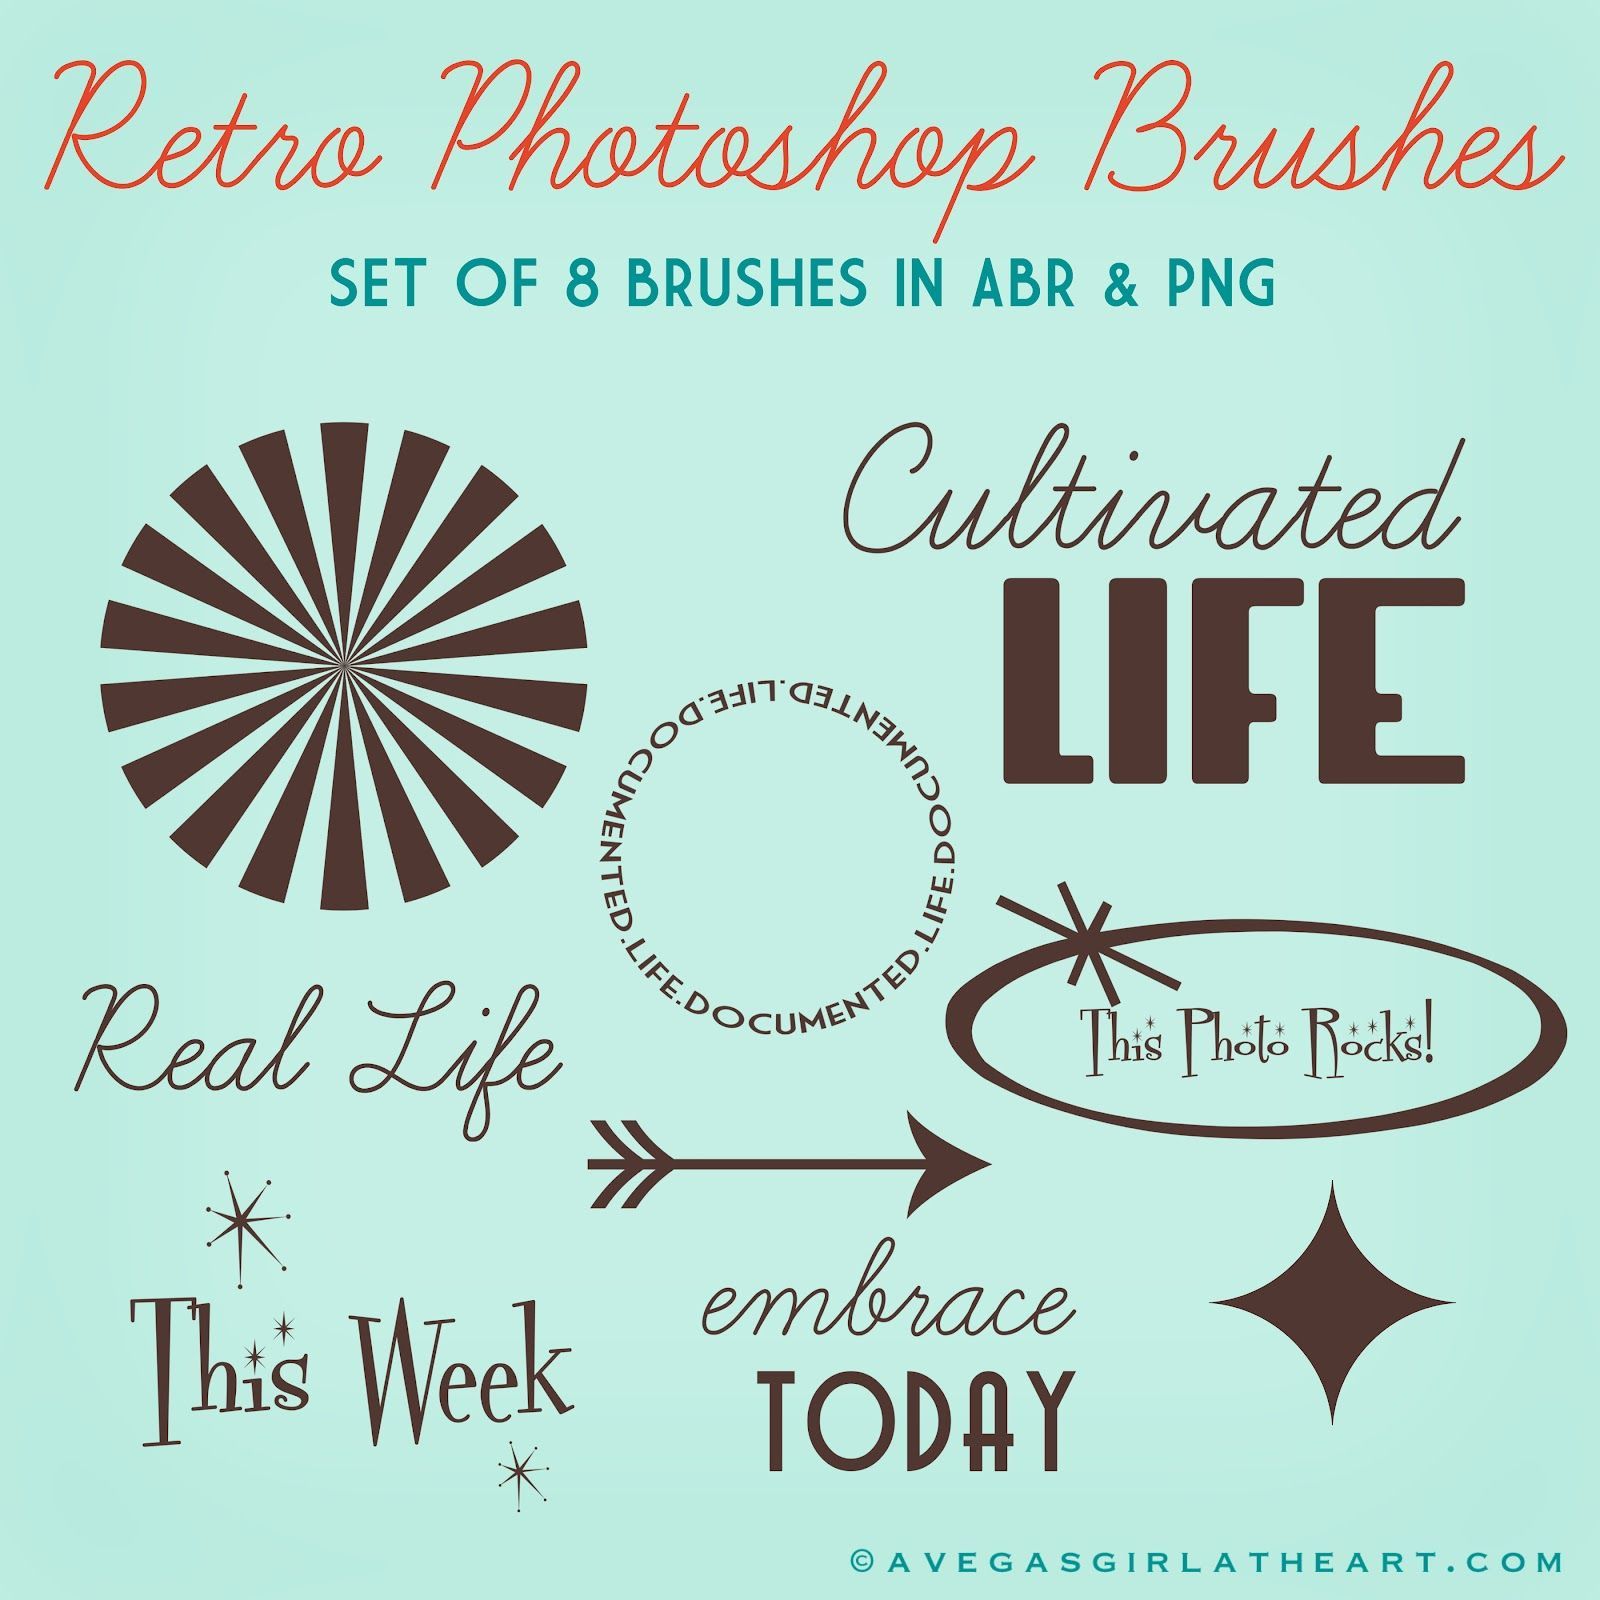 Free Photoshop Brushes – A Vegas Girl at Heart #projectlife